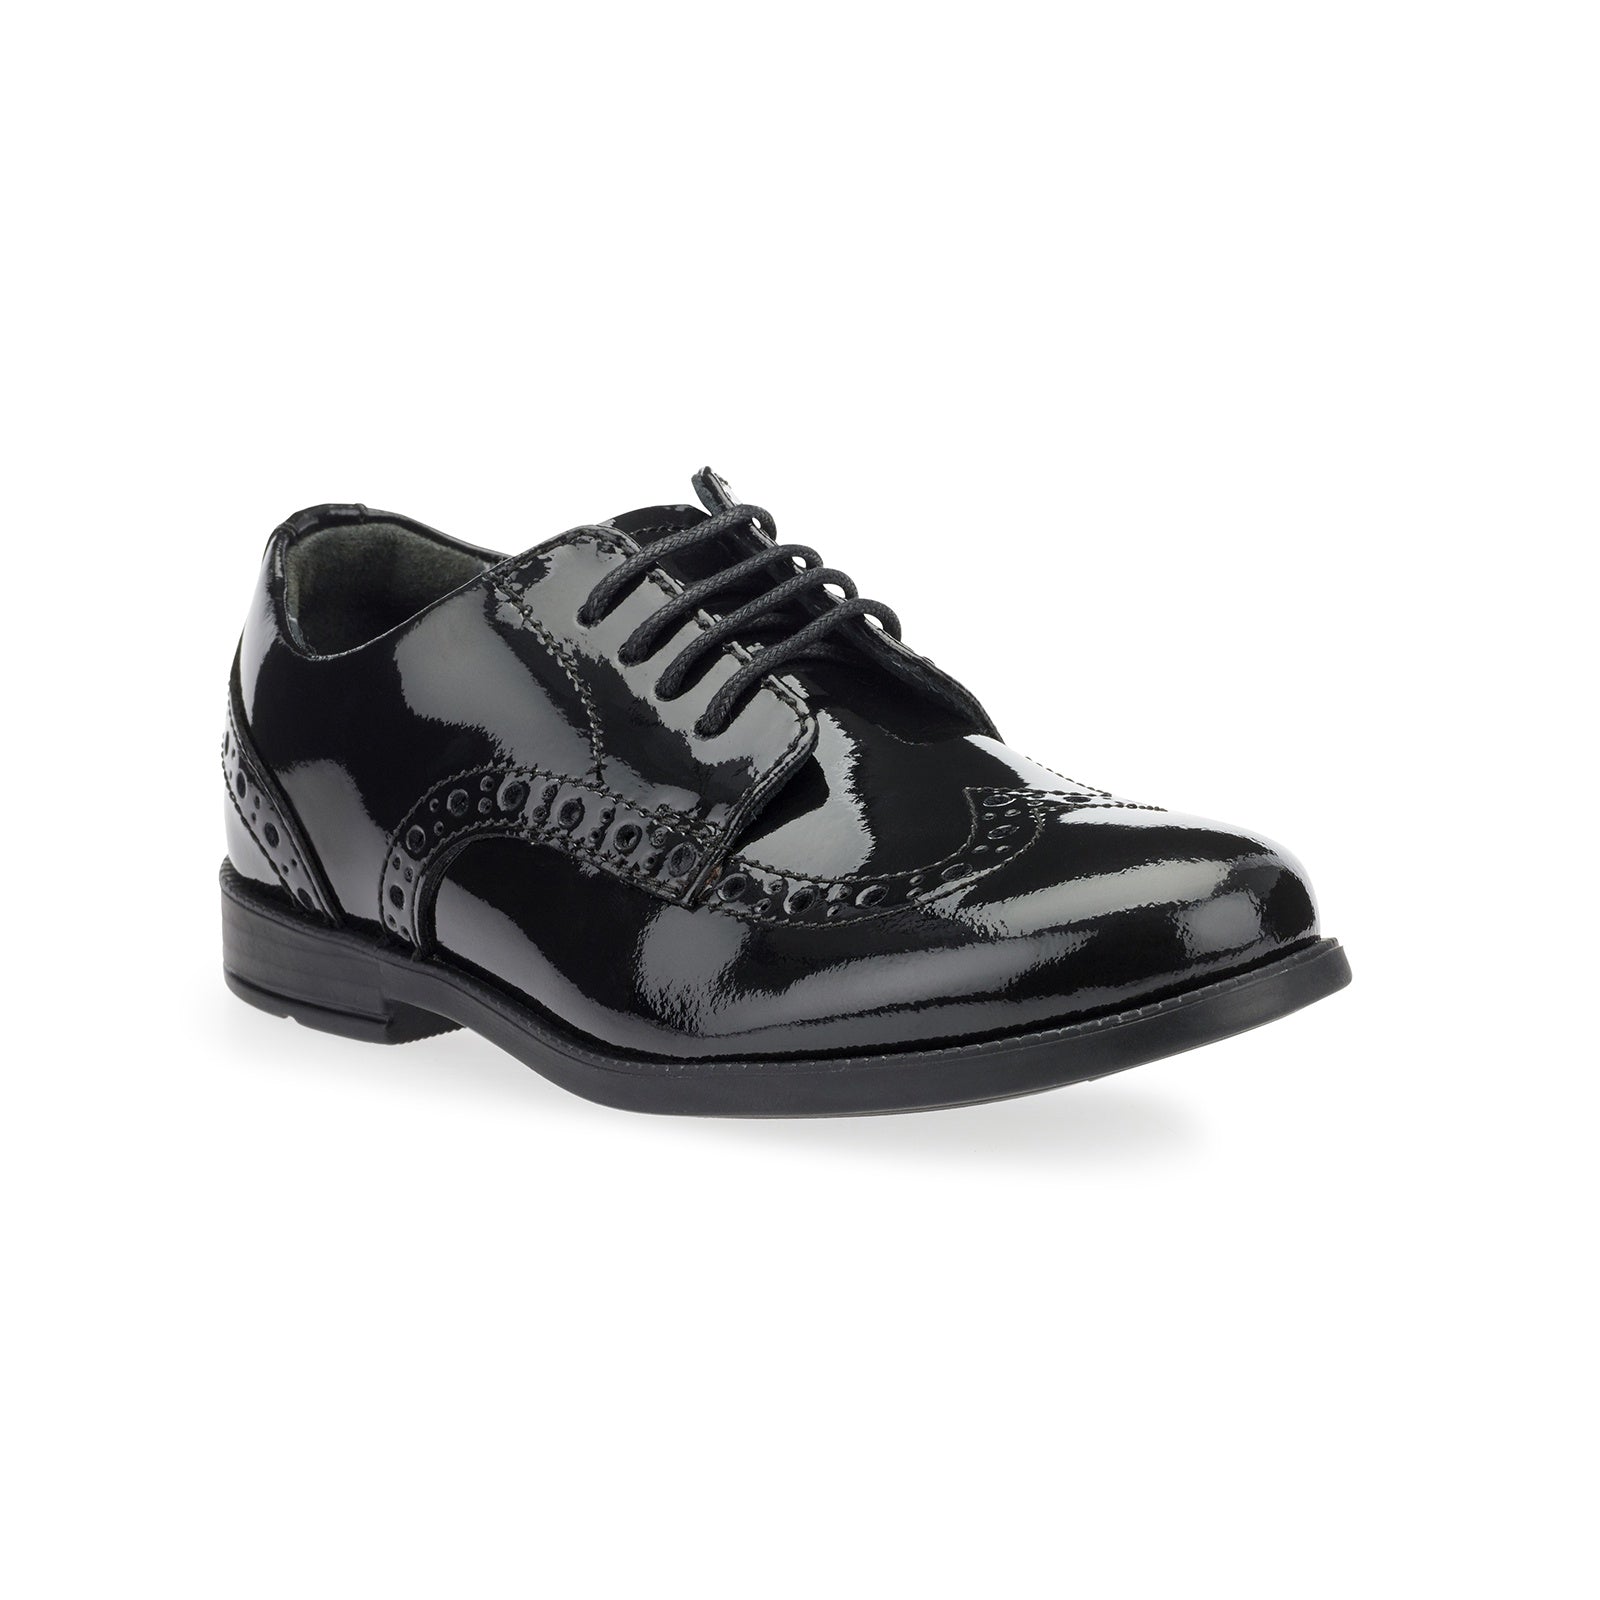 Start-Rite Brogue Senior 3503-3 Girls Black Patent Lace Up Shoe - elevate your sole